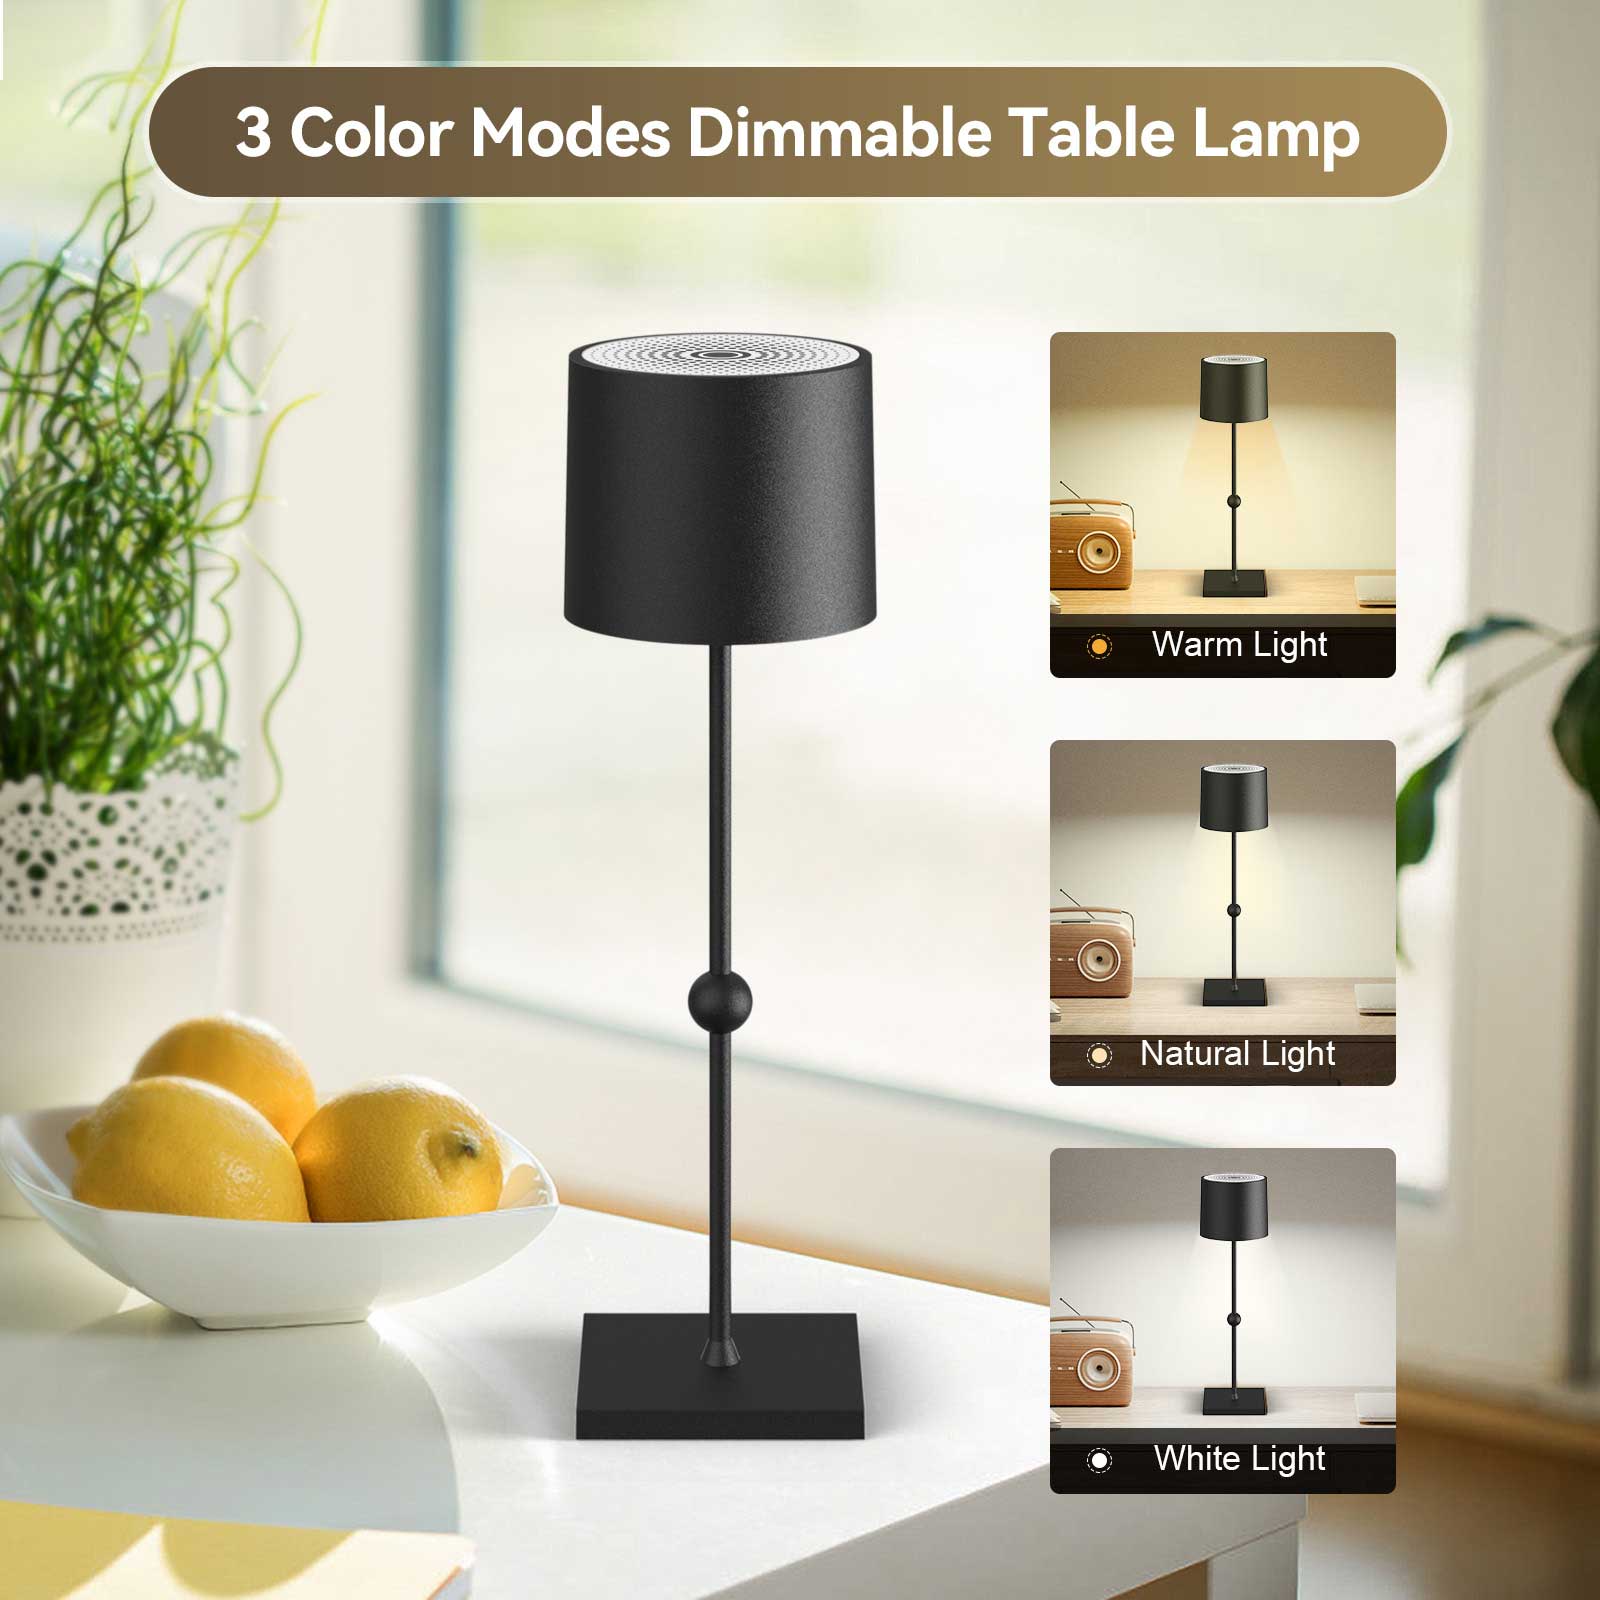 Huiveoo 3 Color Modes Dimmable Table Lamp Silva-C black